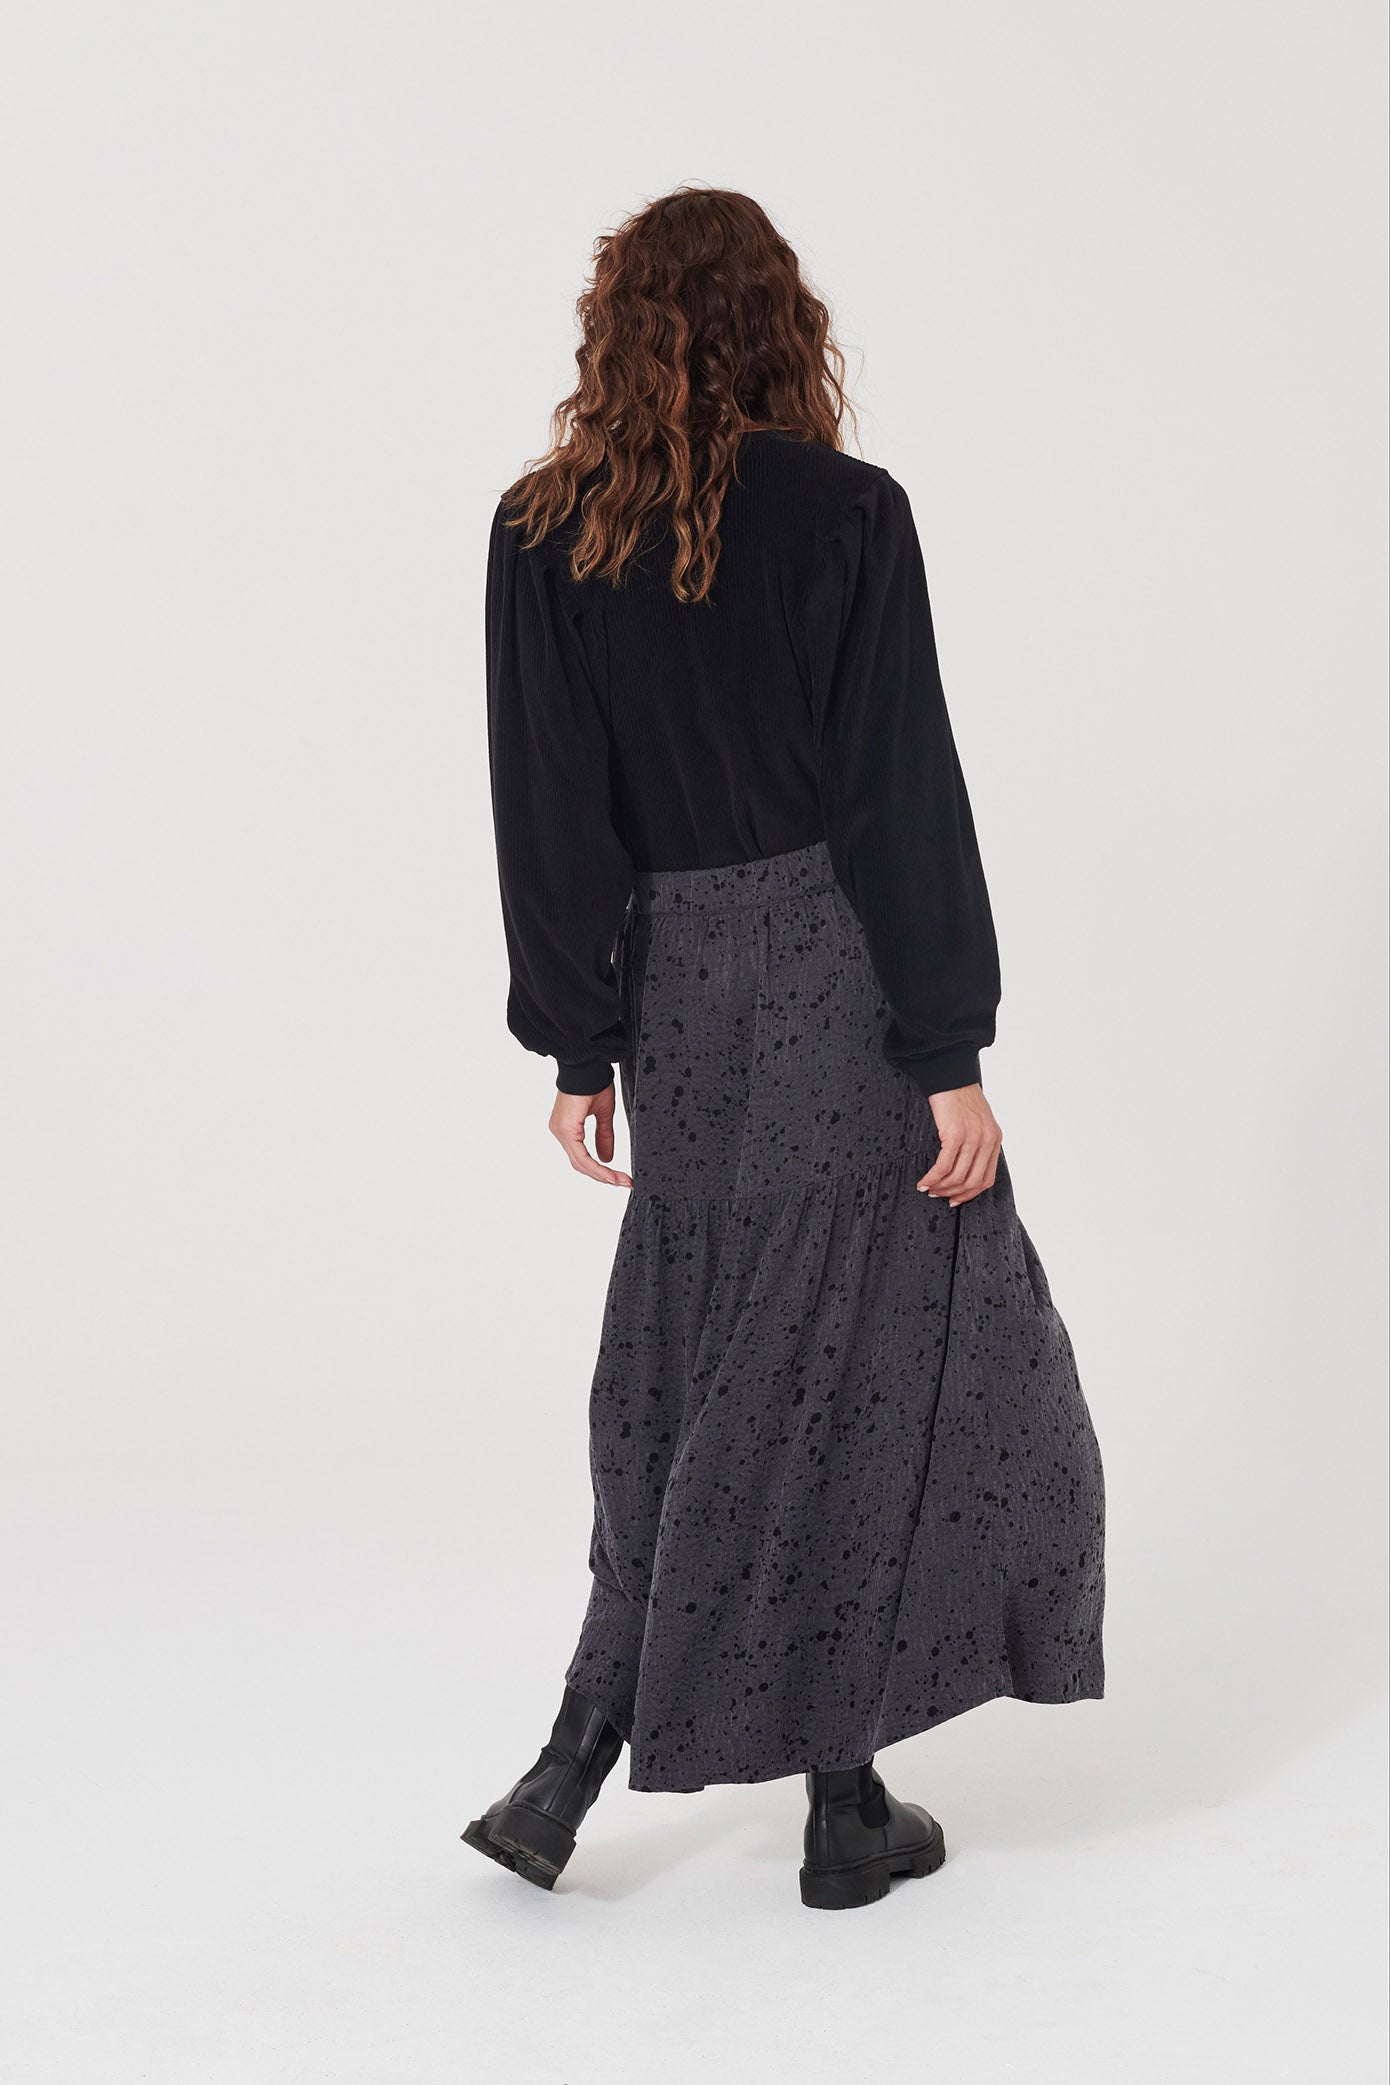 THERESSA skirt in black Leo jacquard by LOVJOI made of Cupro and Ecovero™